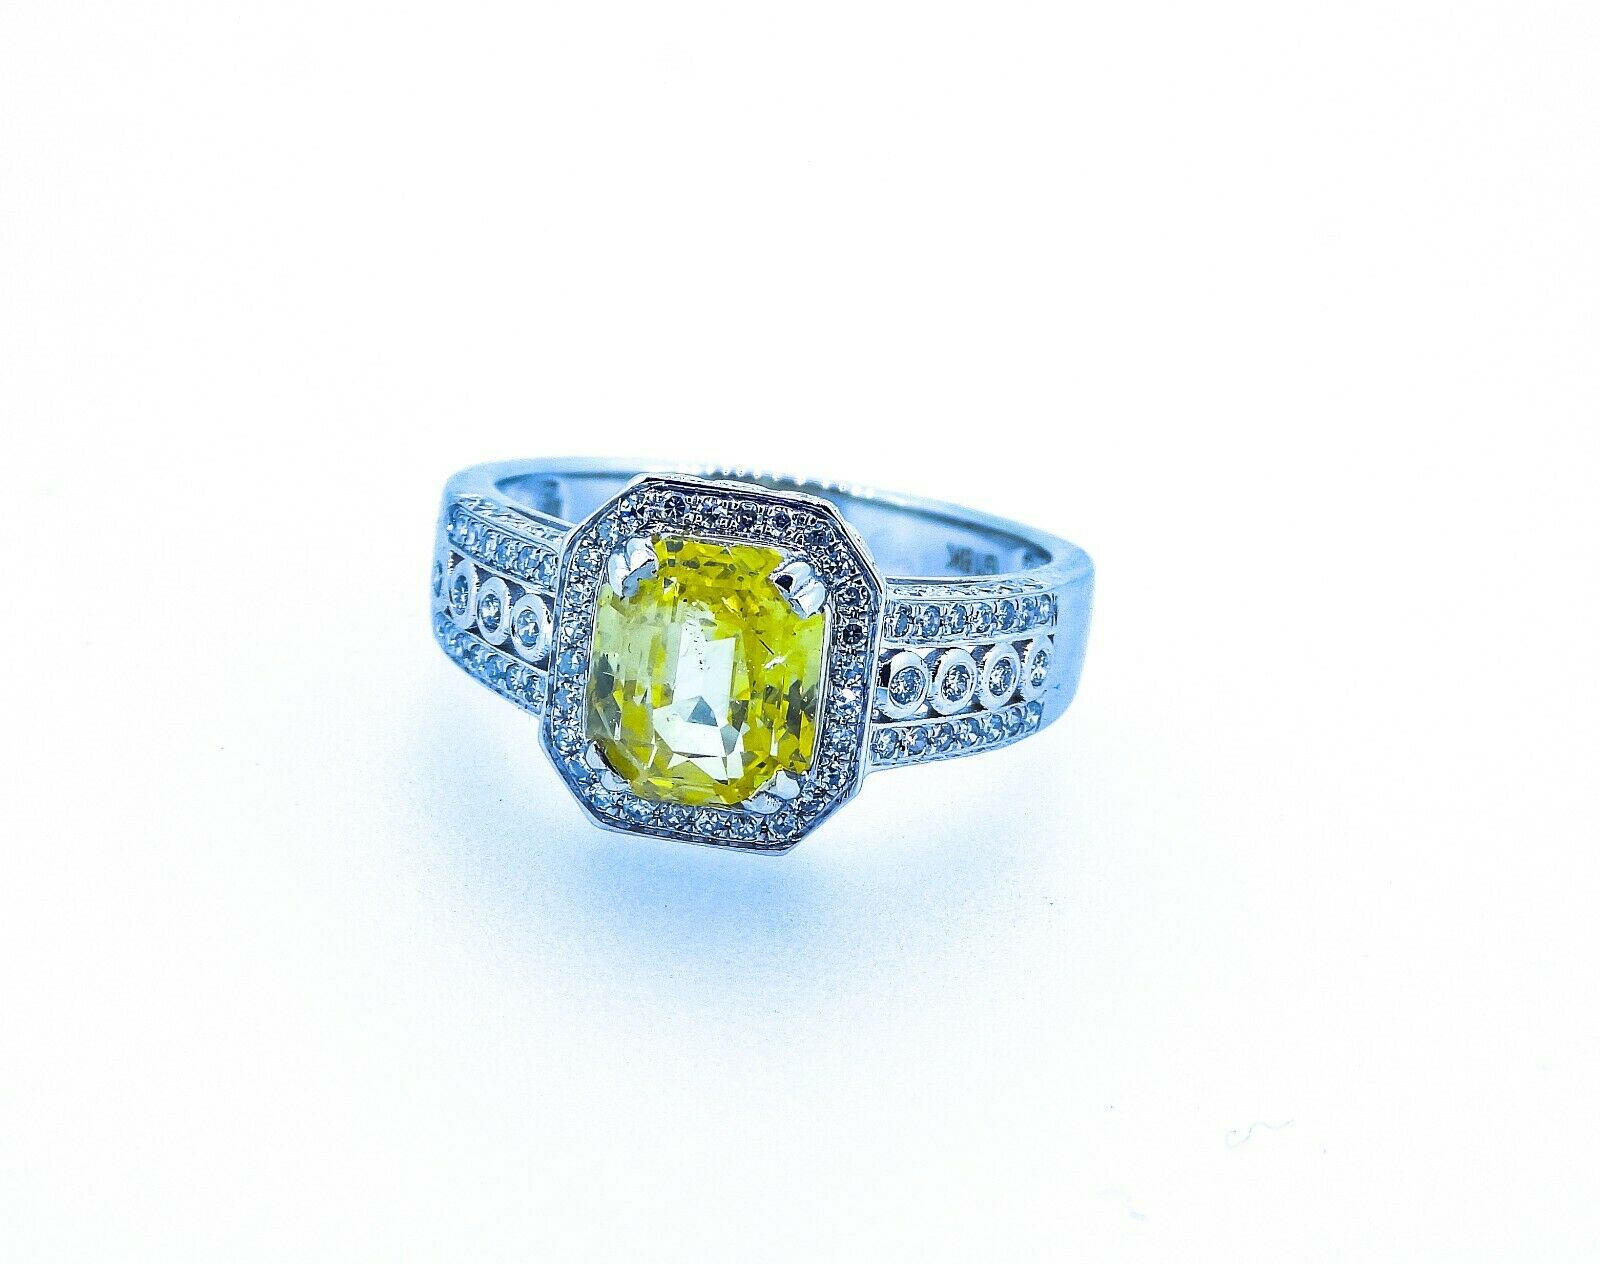 Certified 3.20 ct Yellow VVS Untreated Sapphire & Diamonds Ring - Image 8 of 8